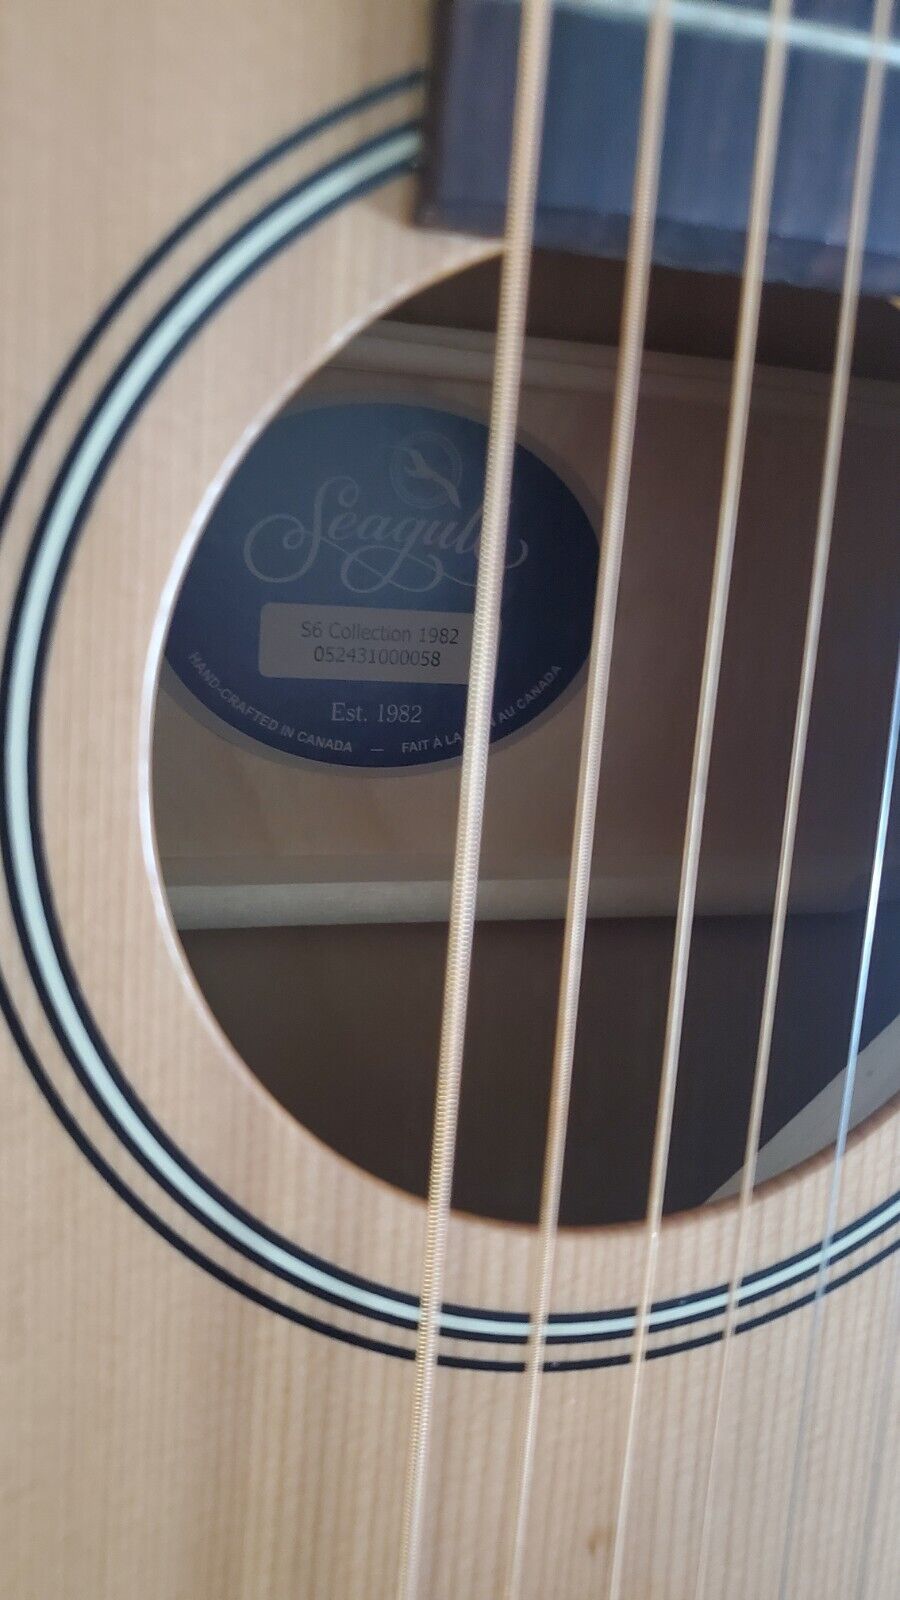 Seagull S6 Collection 1982 Acoustic Guitar 2